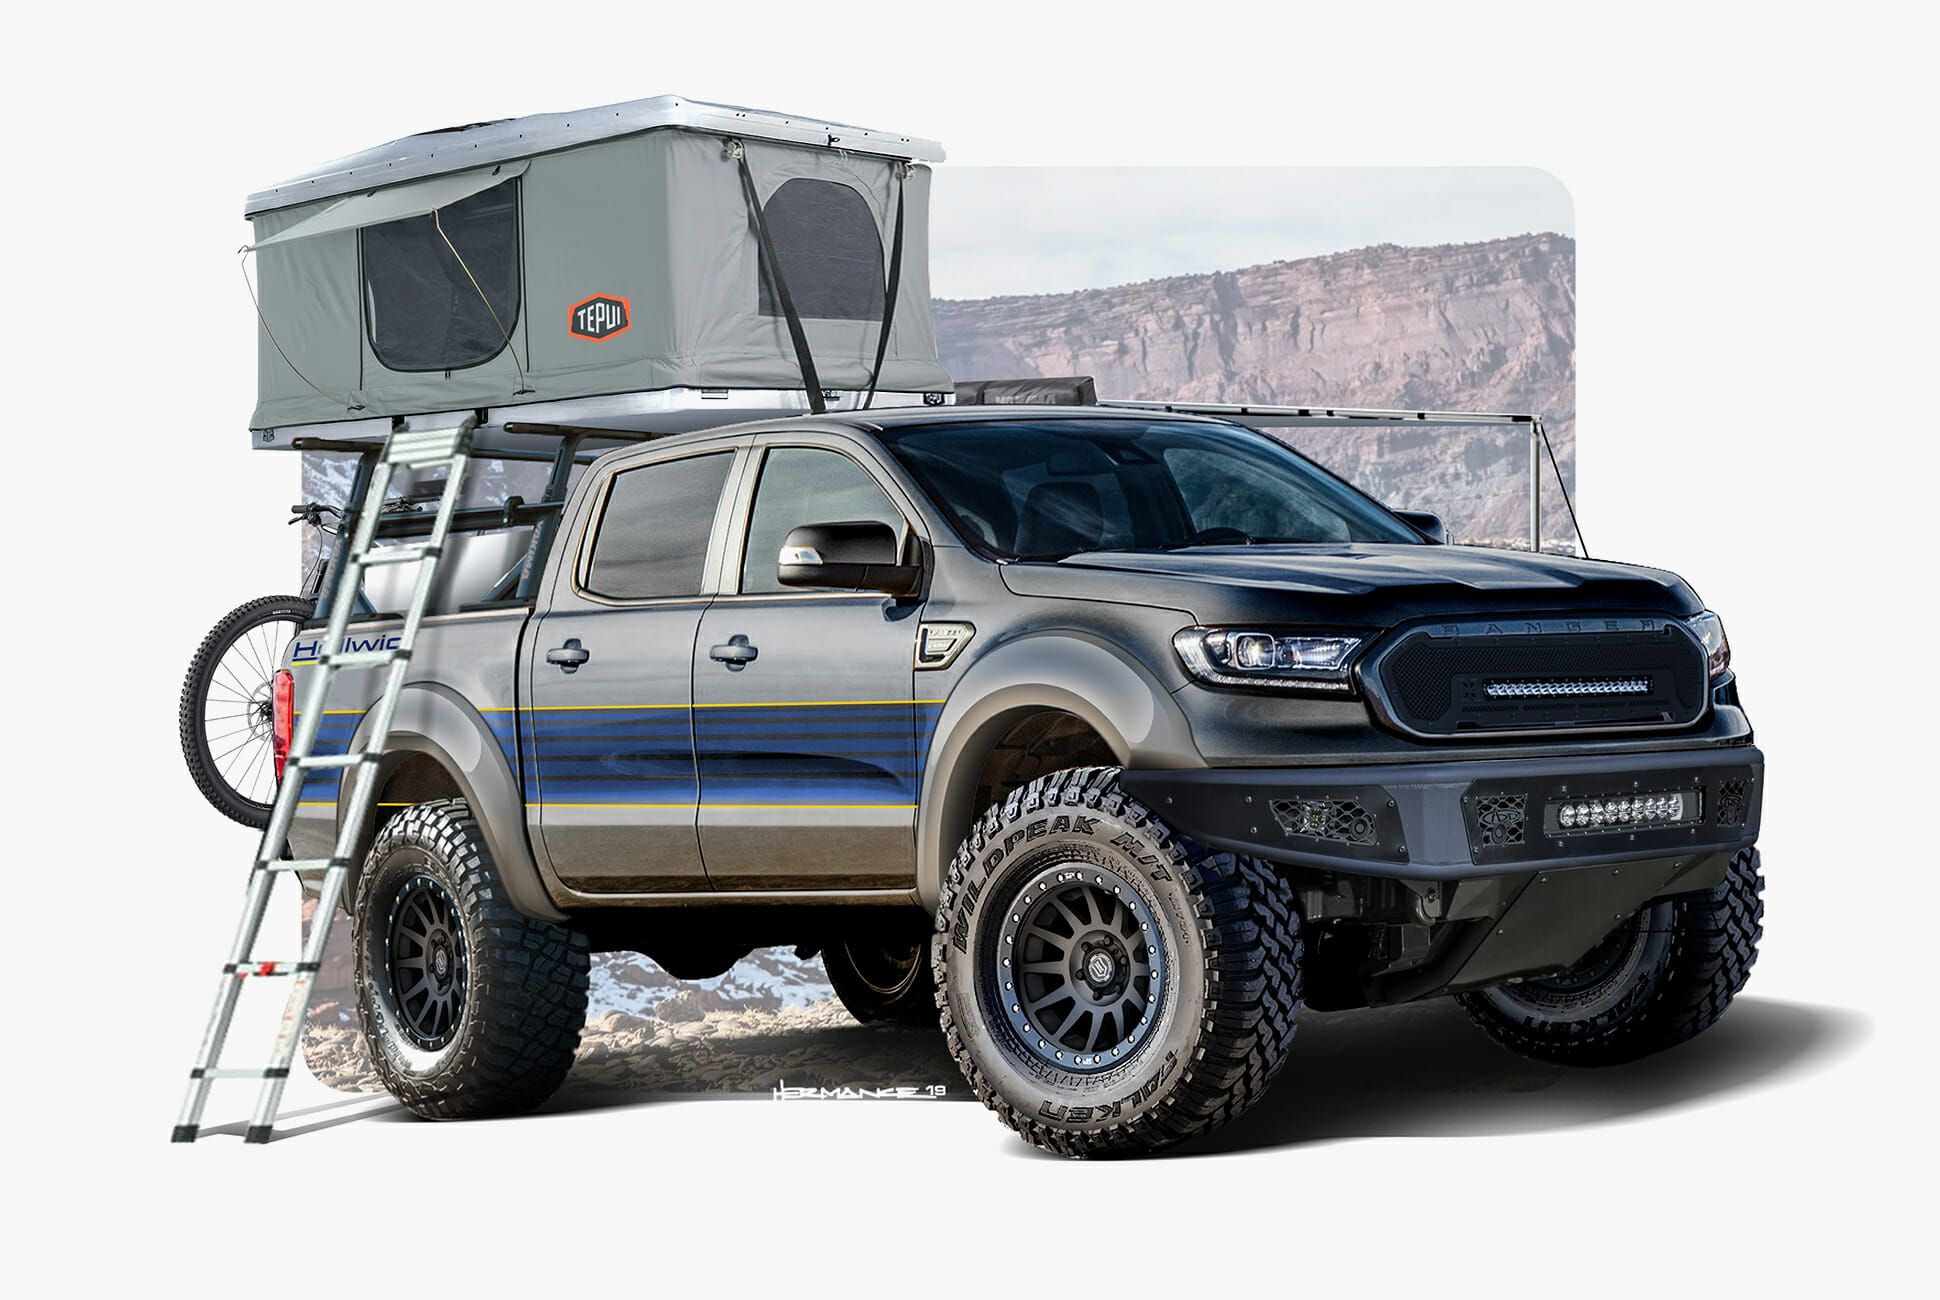 Vrijlating puree Arresteren Check Out These Ford Ranger Overlanding Concepts &bull; Gear Patrol